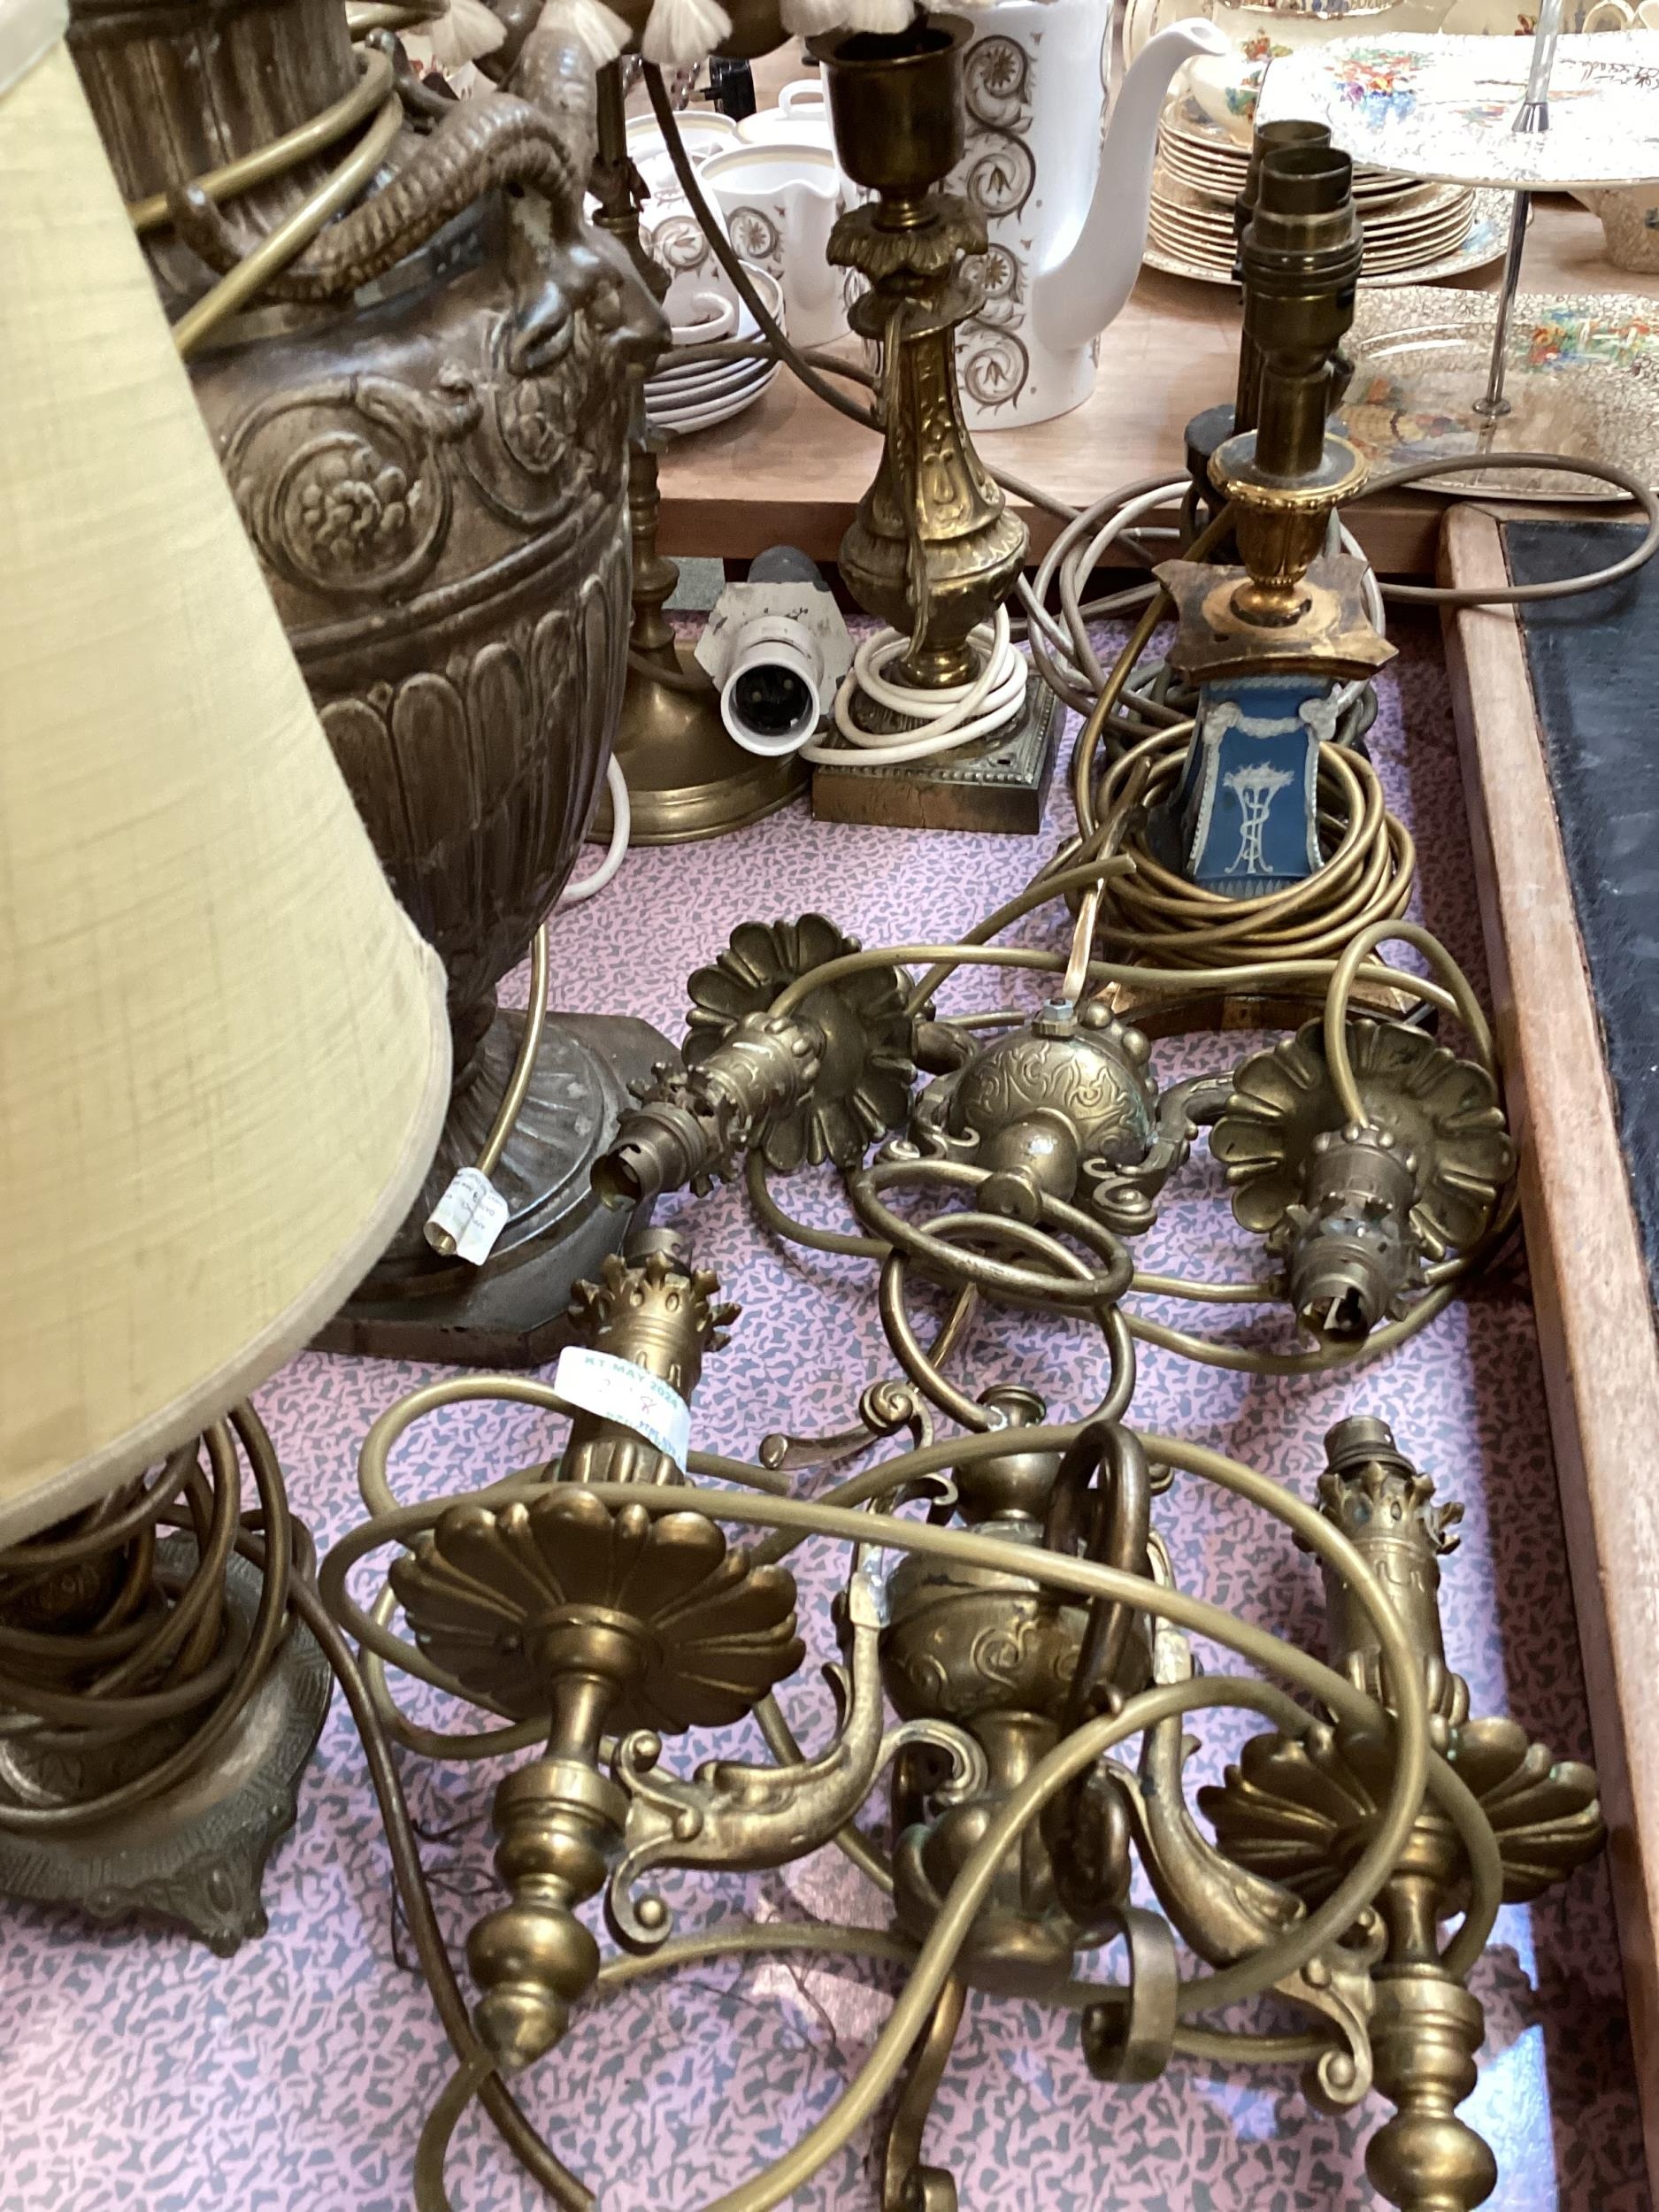 A quantity of lamps, lampshades, wall sconces and candlesticks, all as found; Fawley Manor Clearance - Image 4 of 9